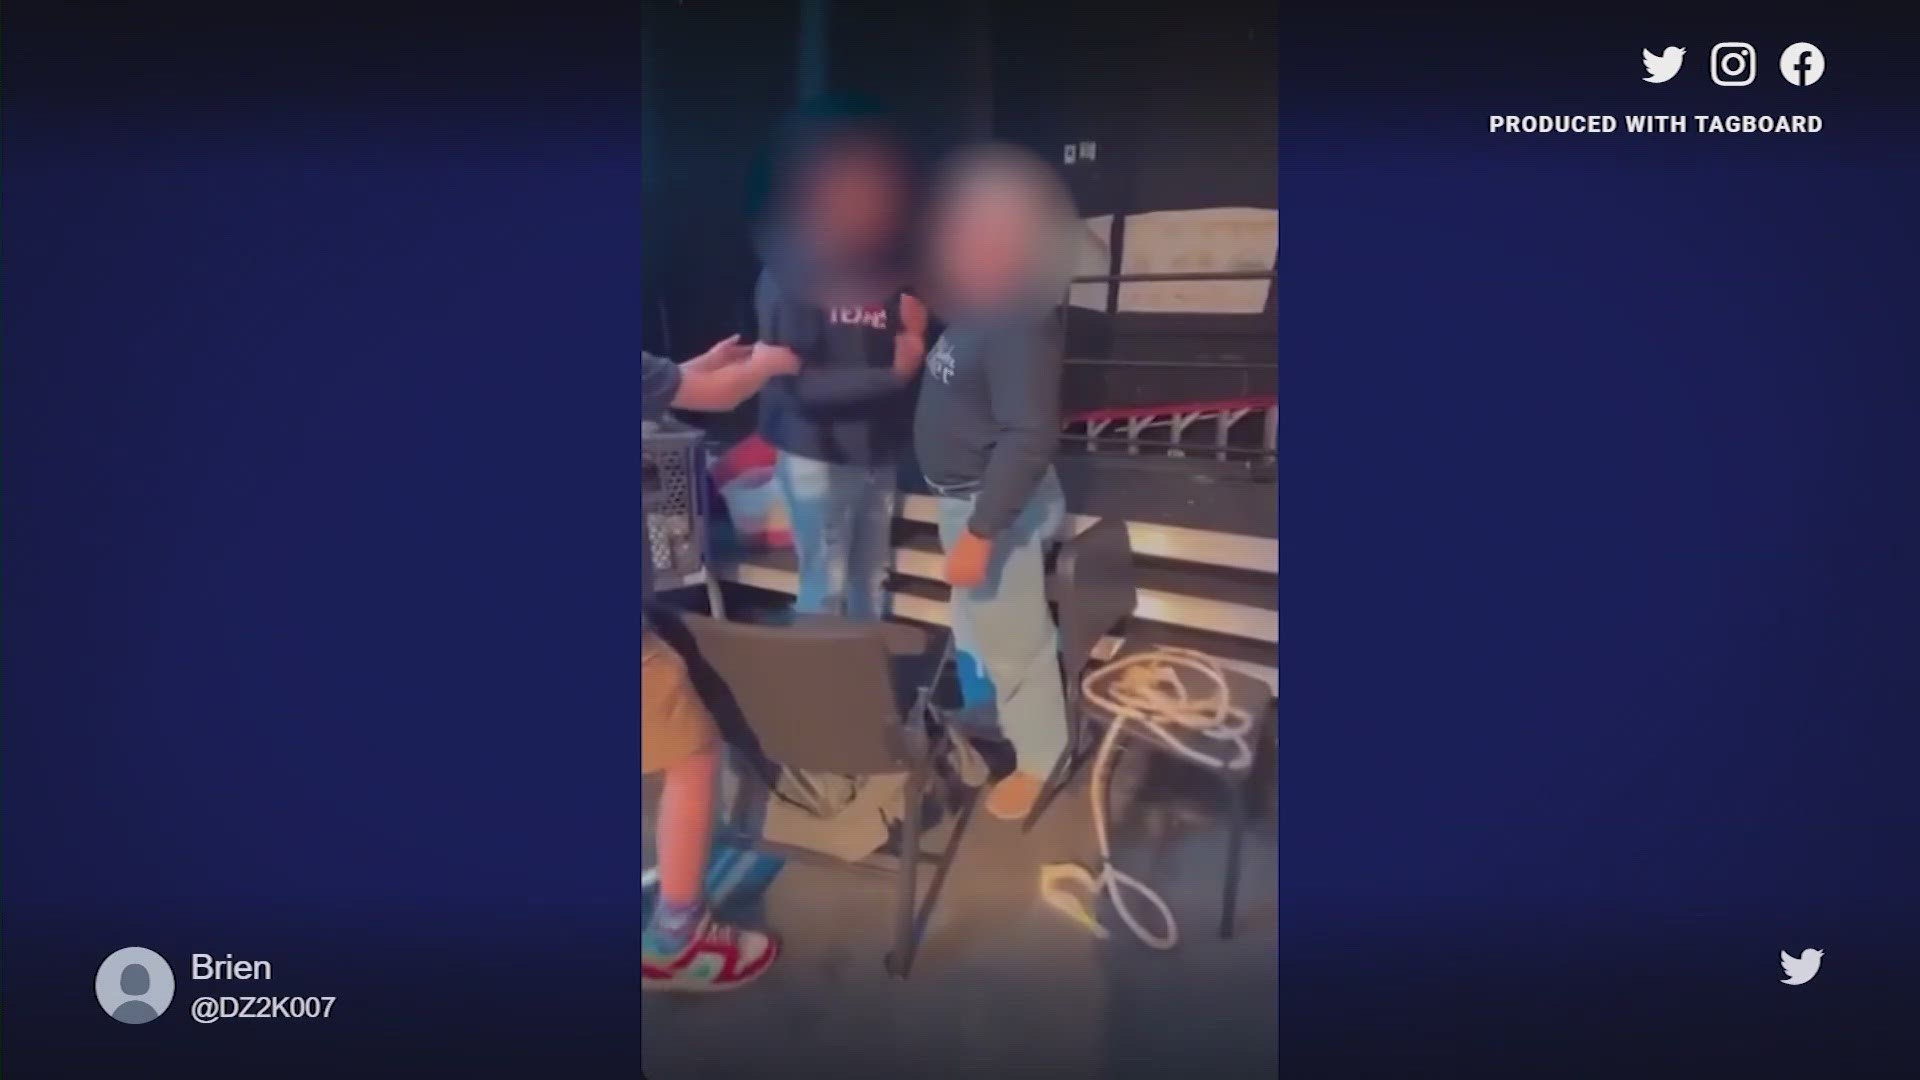 Parents are concerned after seeing a video showing a student punching a teacher in the head on Thursday.